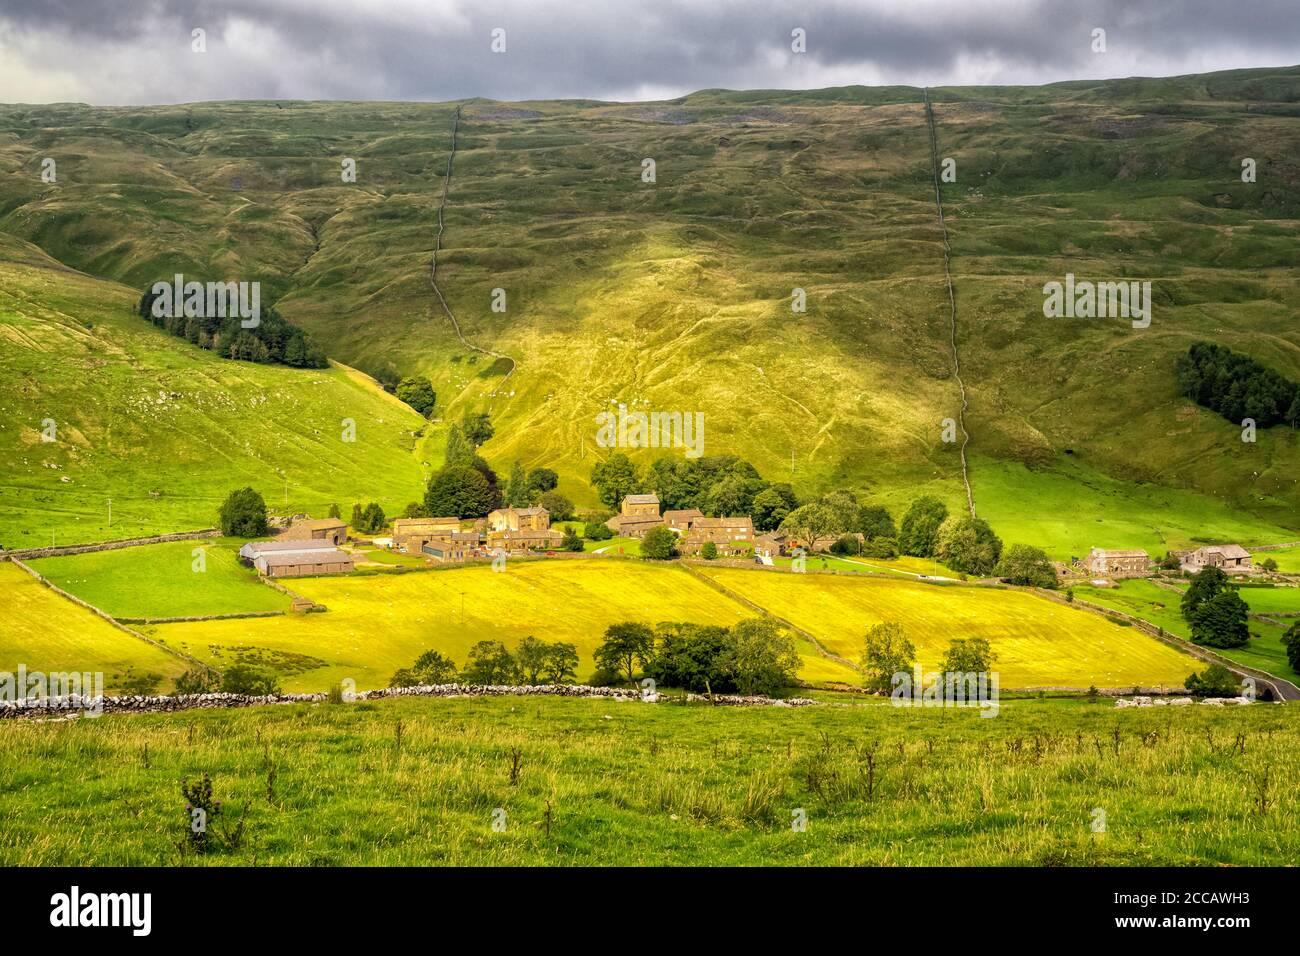 Halton Gill is a hamlet and civil parish in Littondale in the Yorkshire Dales in North Yorkshire, England. It is situated 2 miles up Littondale from L Stock Photo